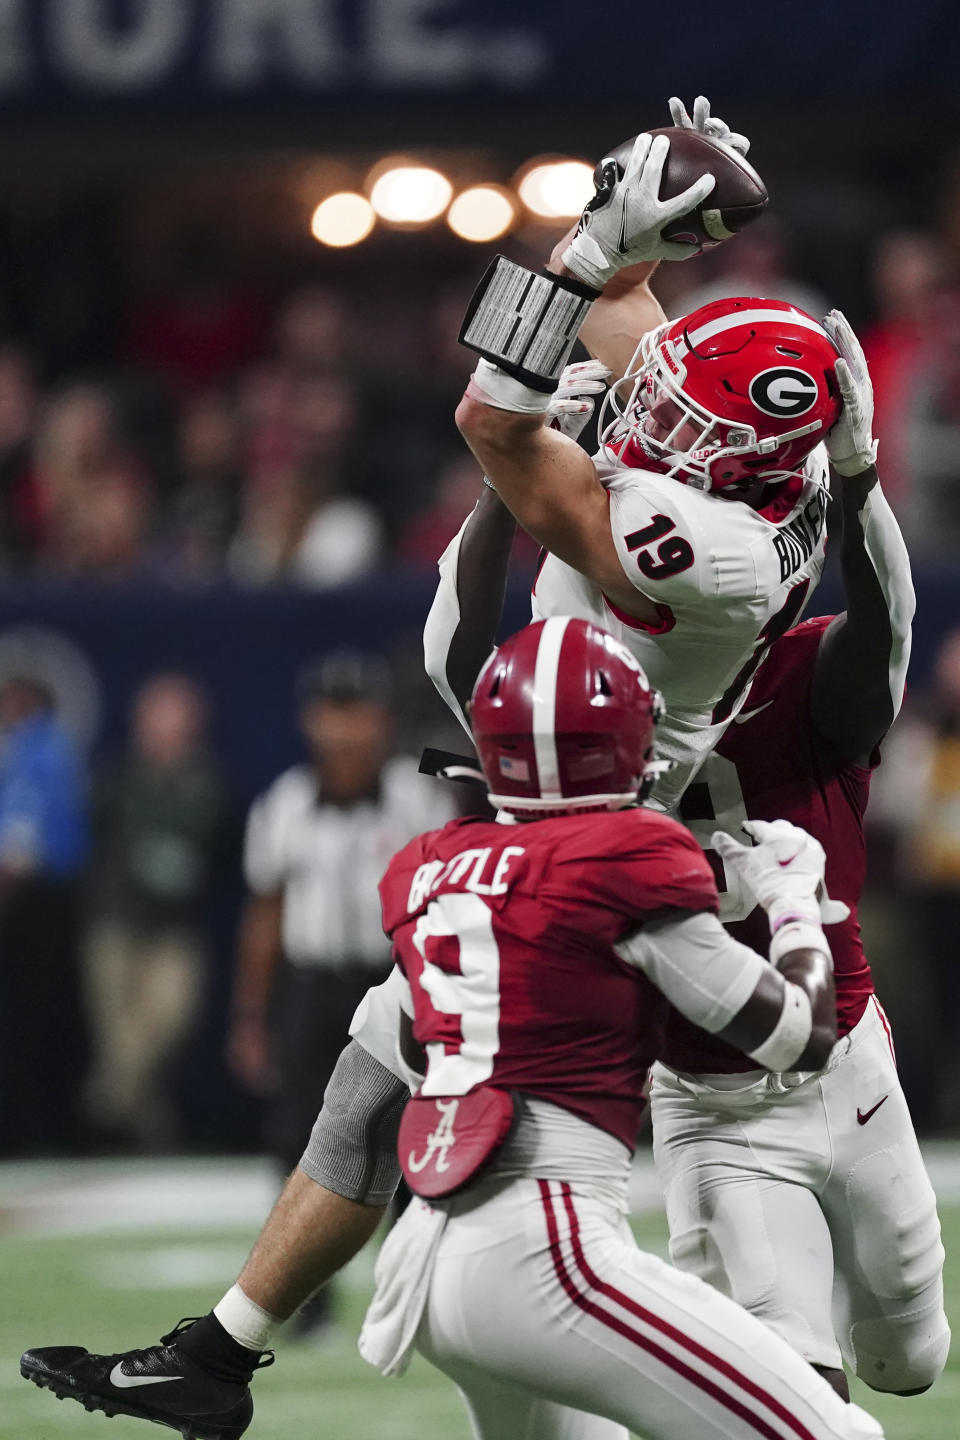 Georgia tight end Brock Bowers (19) makes ther catch against Alabama defensive back Jordan Battle (9) during the second half of the Southeastern Conference championship NCAA college football game, Saturday, Dec. 4, 2021, in Atlanta. (AP Photo/John Bazemore)